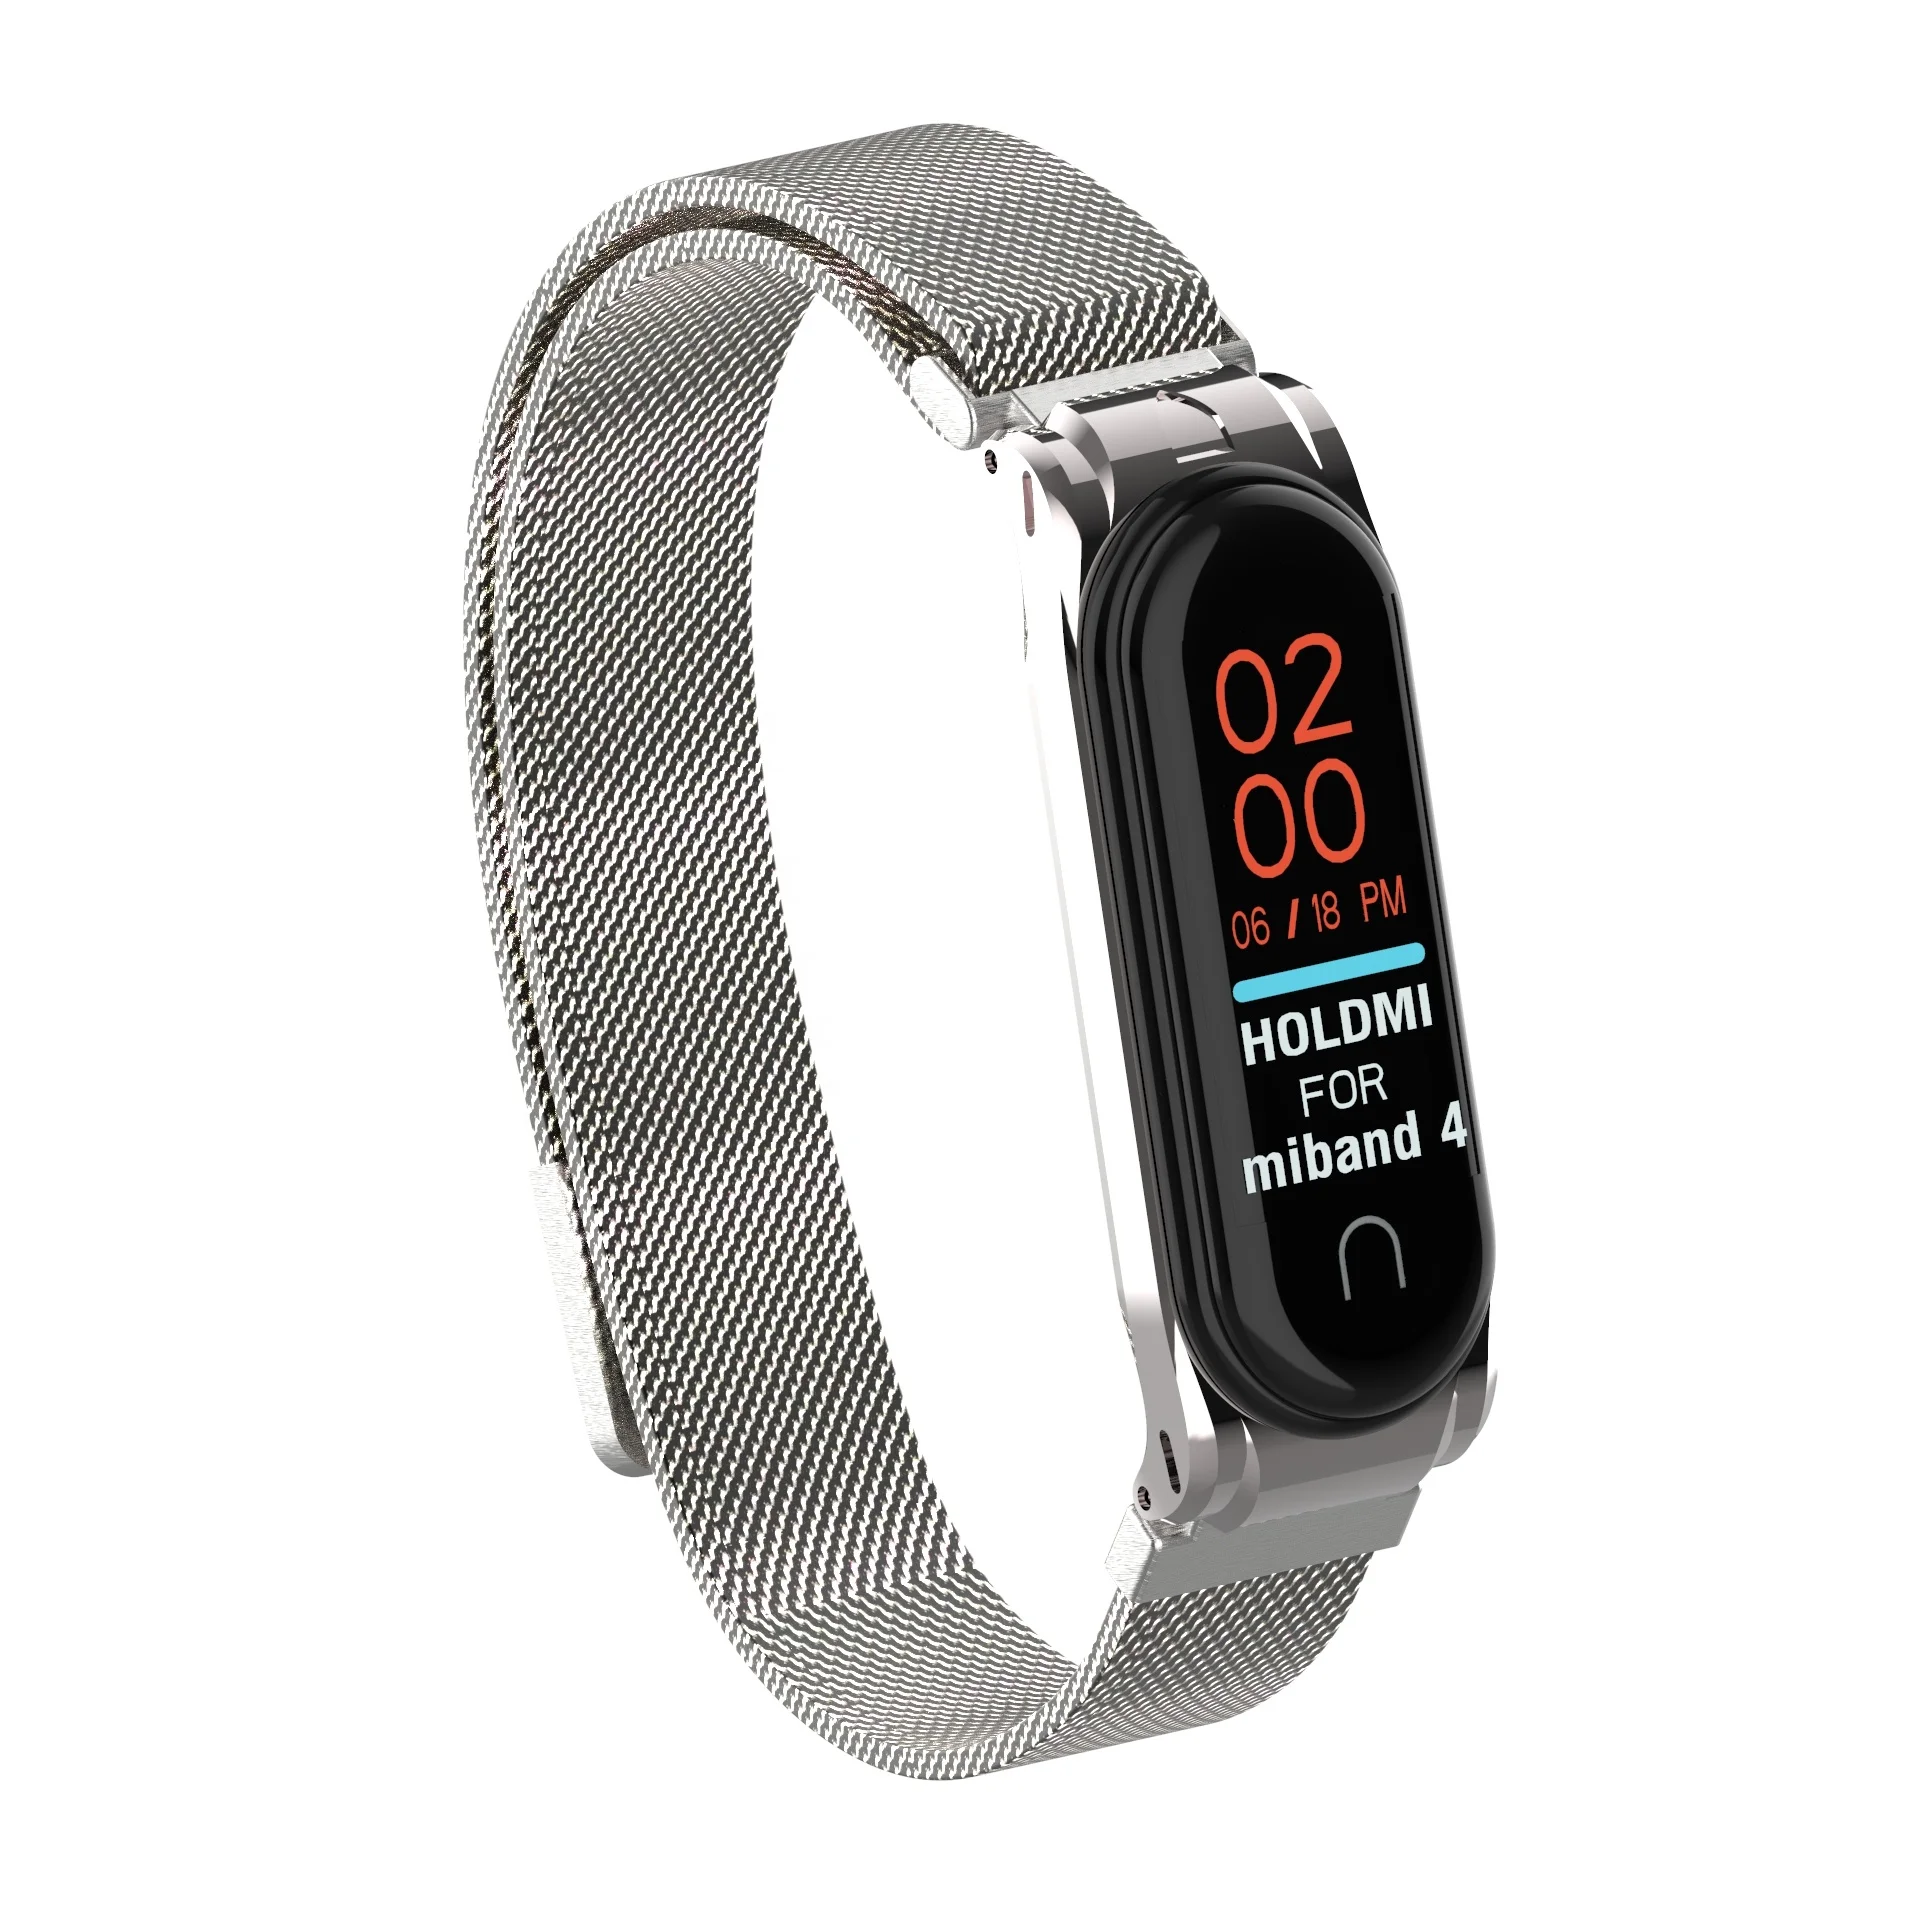 

HOLDMI ODM 43026 series silver color stainless steel miband 4 strap milanese loop for mi band 4 and 3, Pvd silver